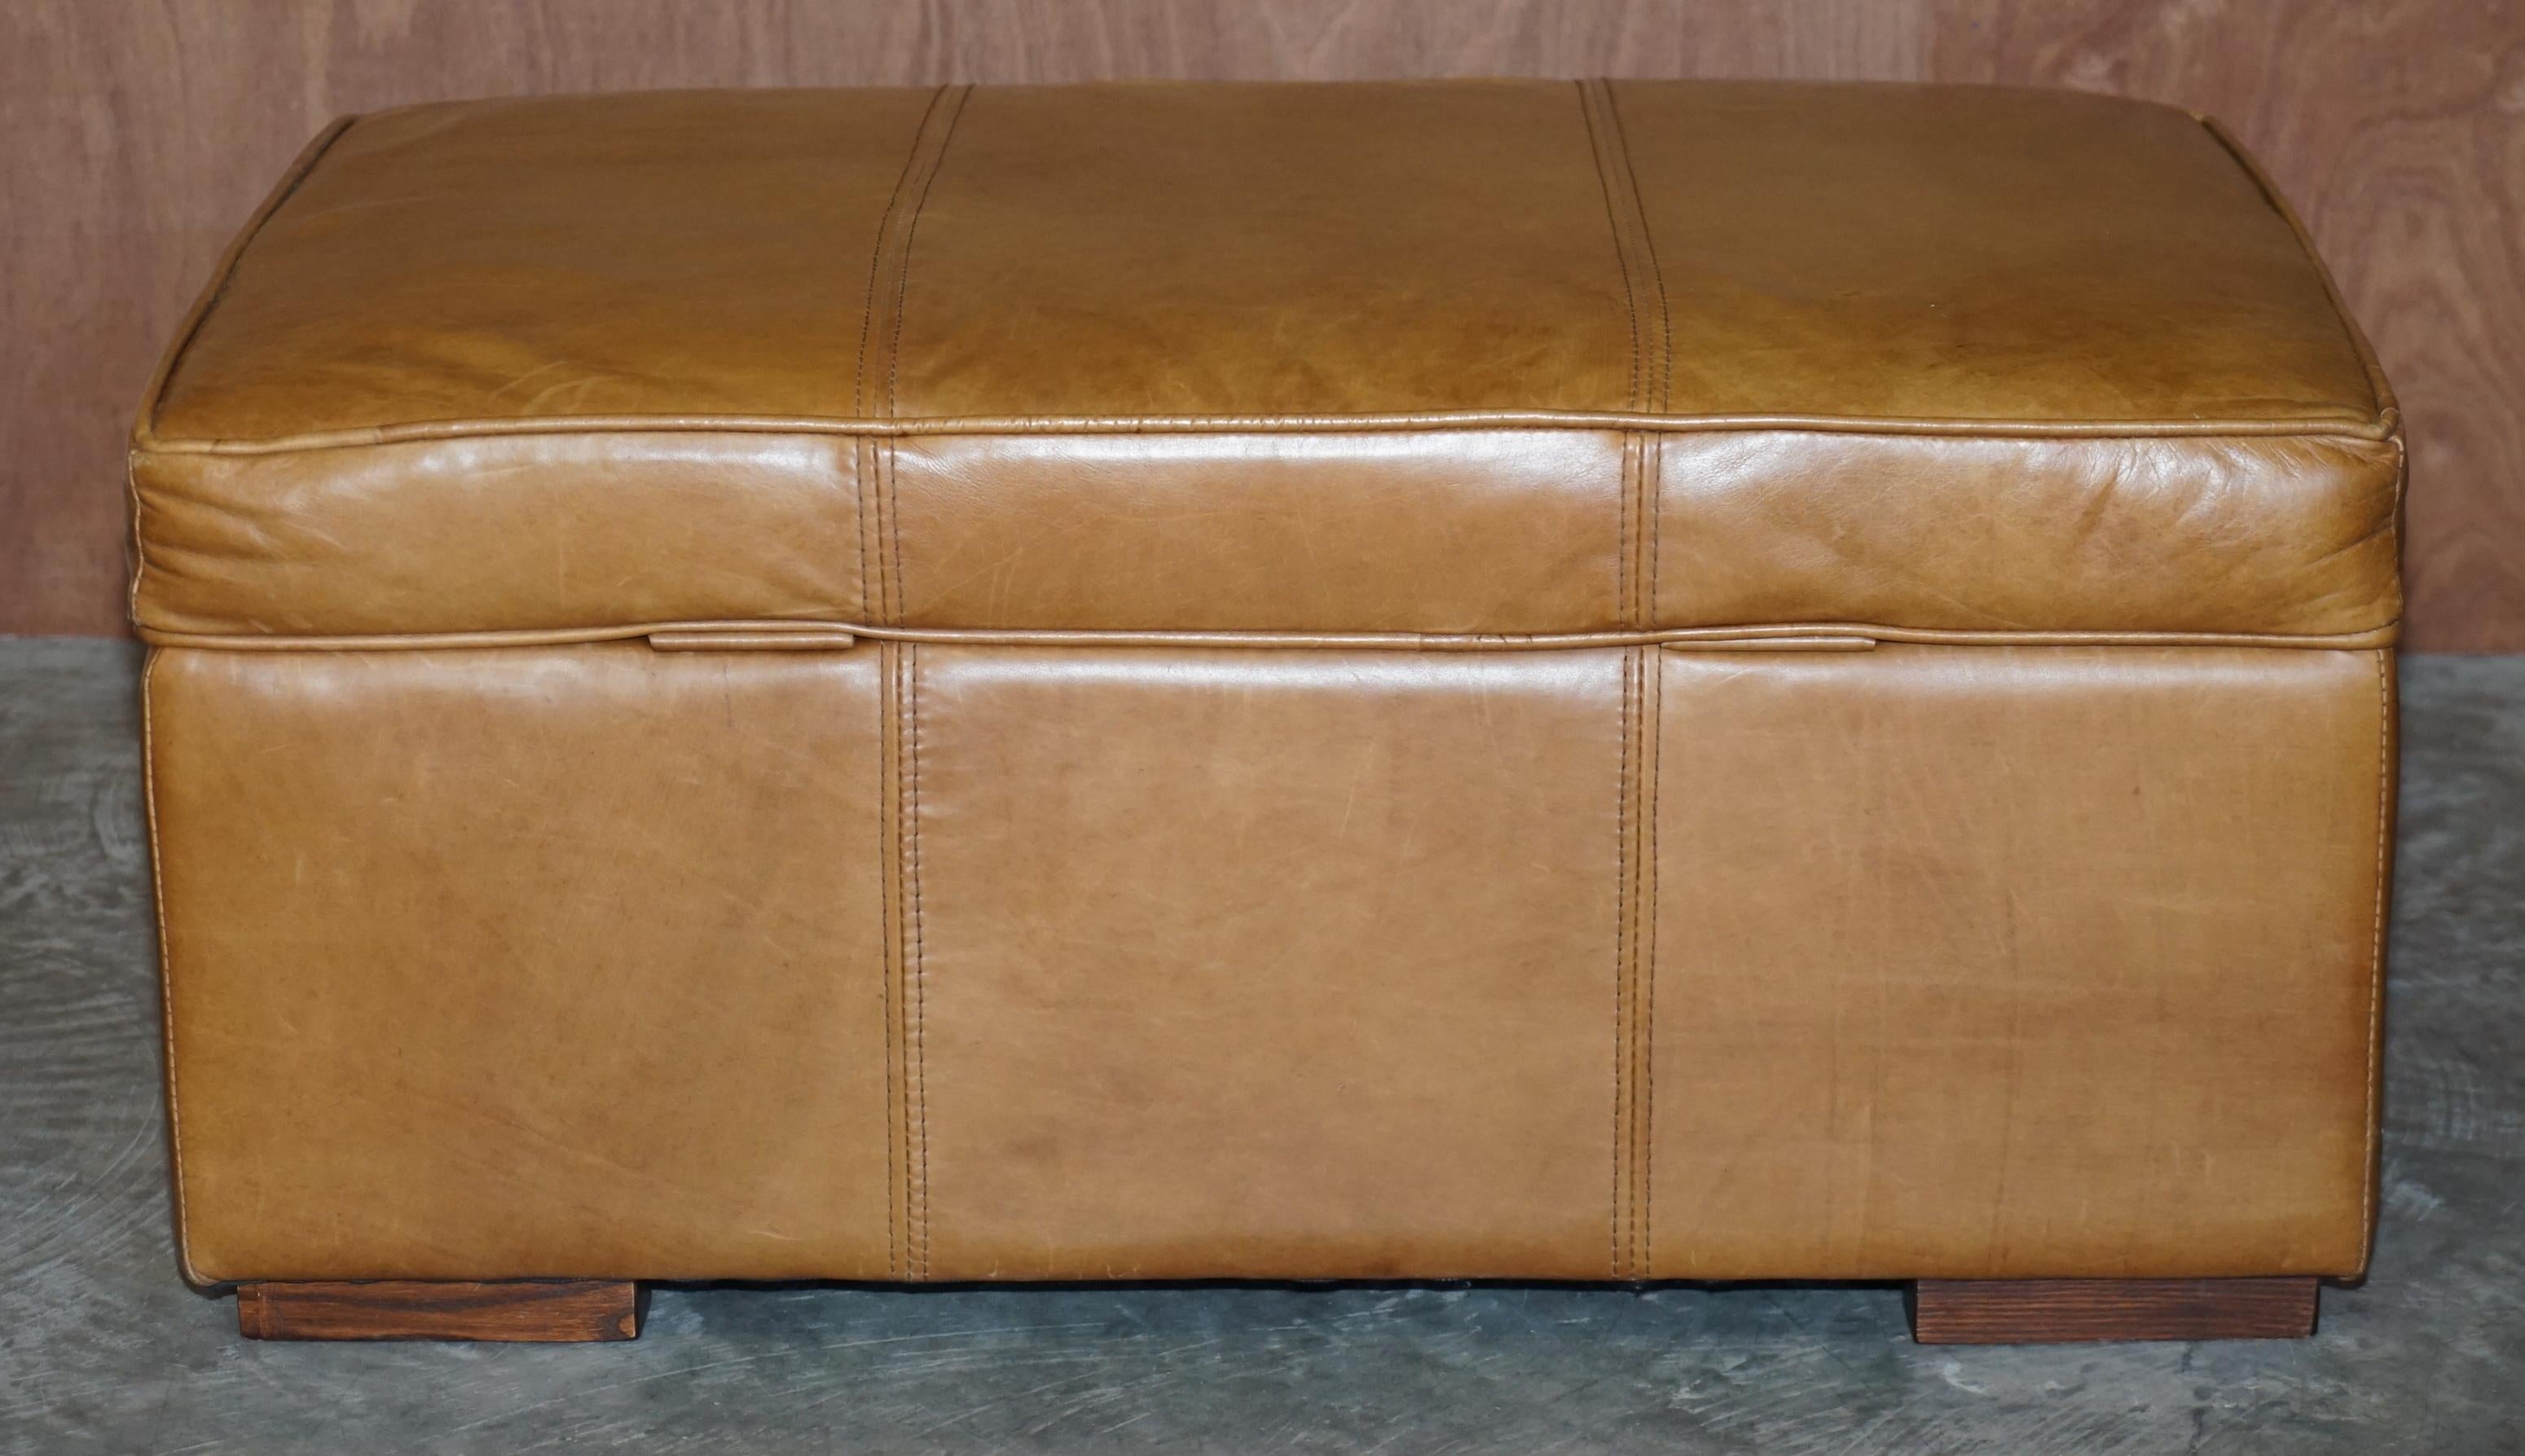 Halo Grouch Reggio Tan Brown Leather Large Ottoman Footstool for Four to Share 2